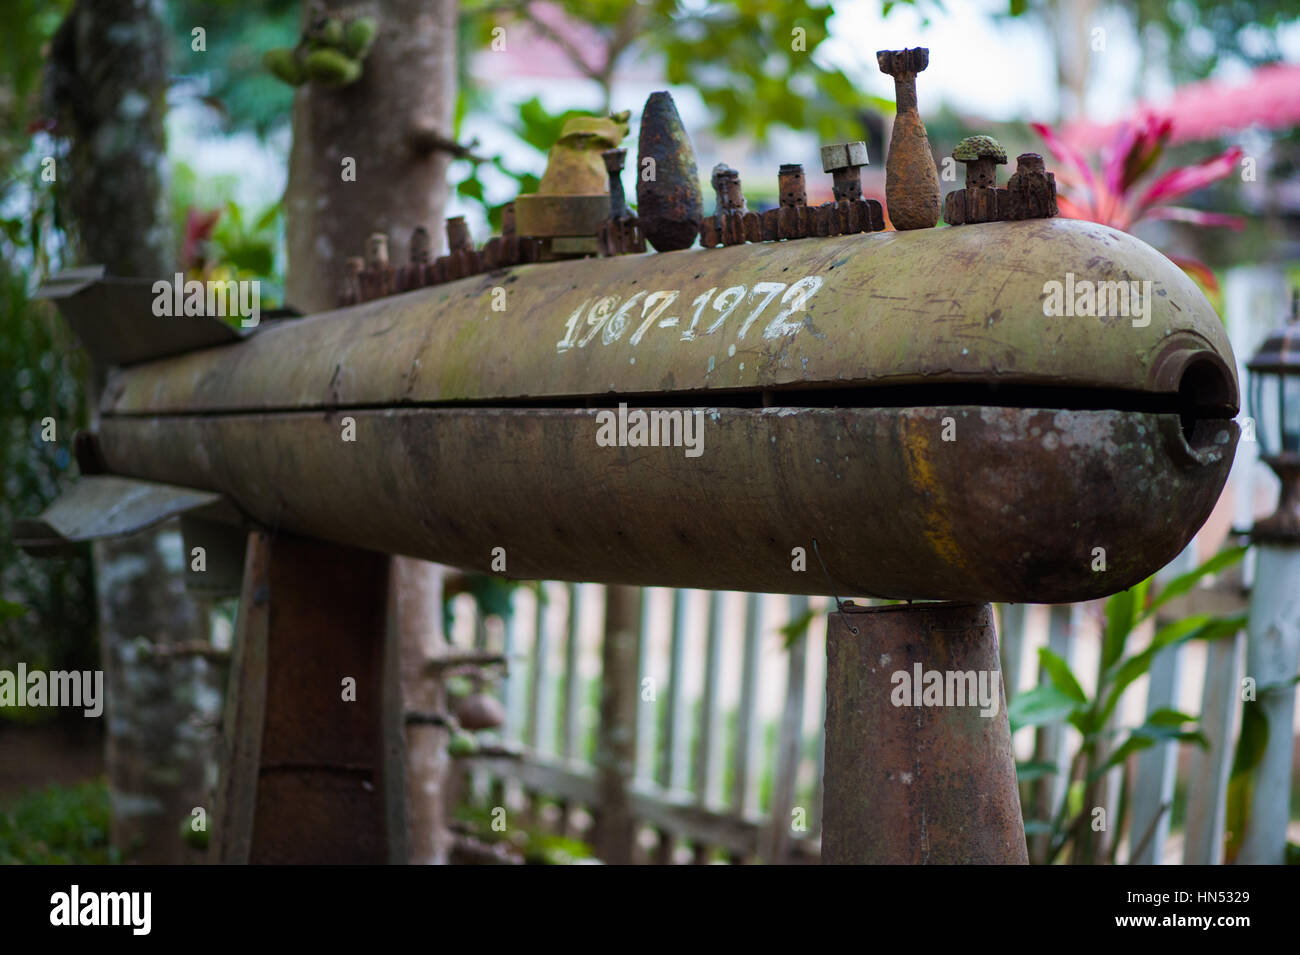 Old american bombs used for decoration in Laos Stock Photo